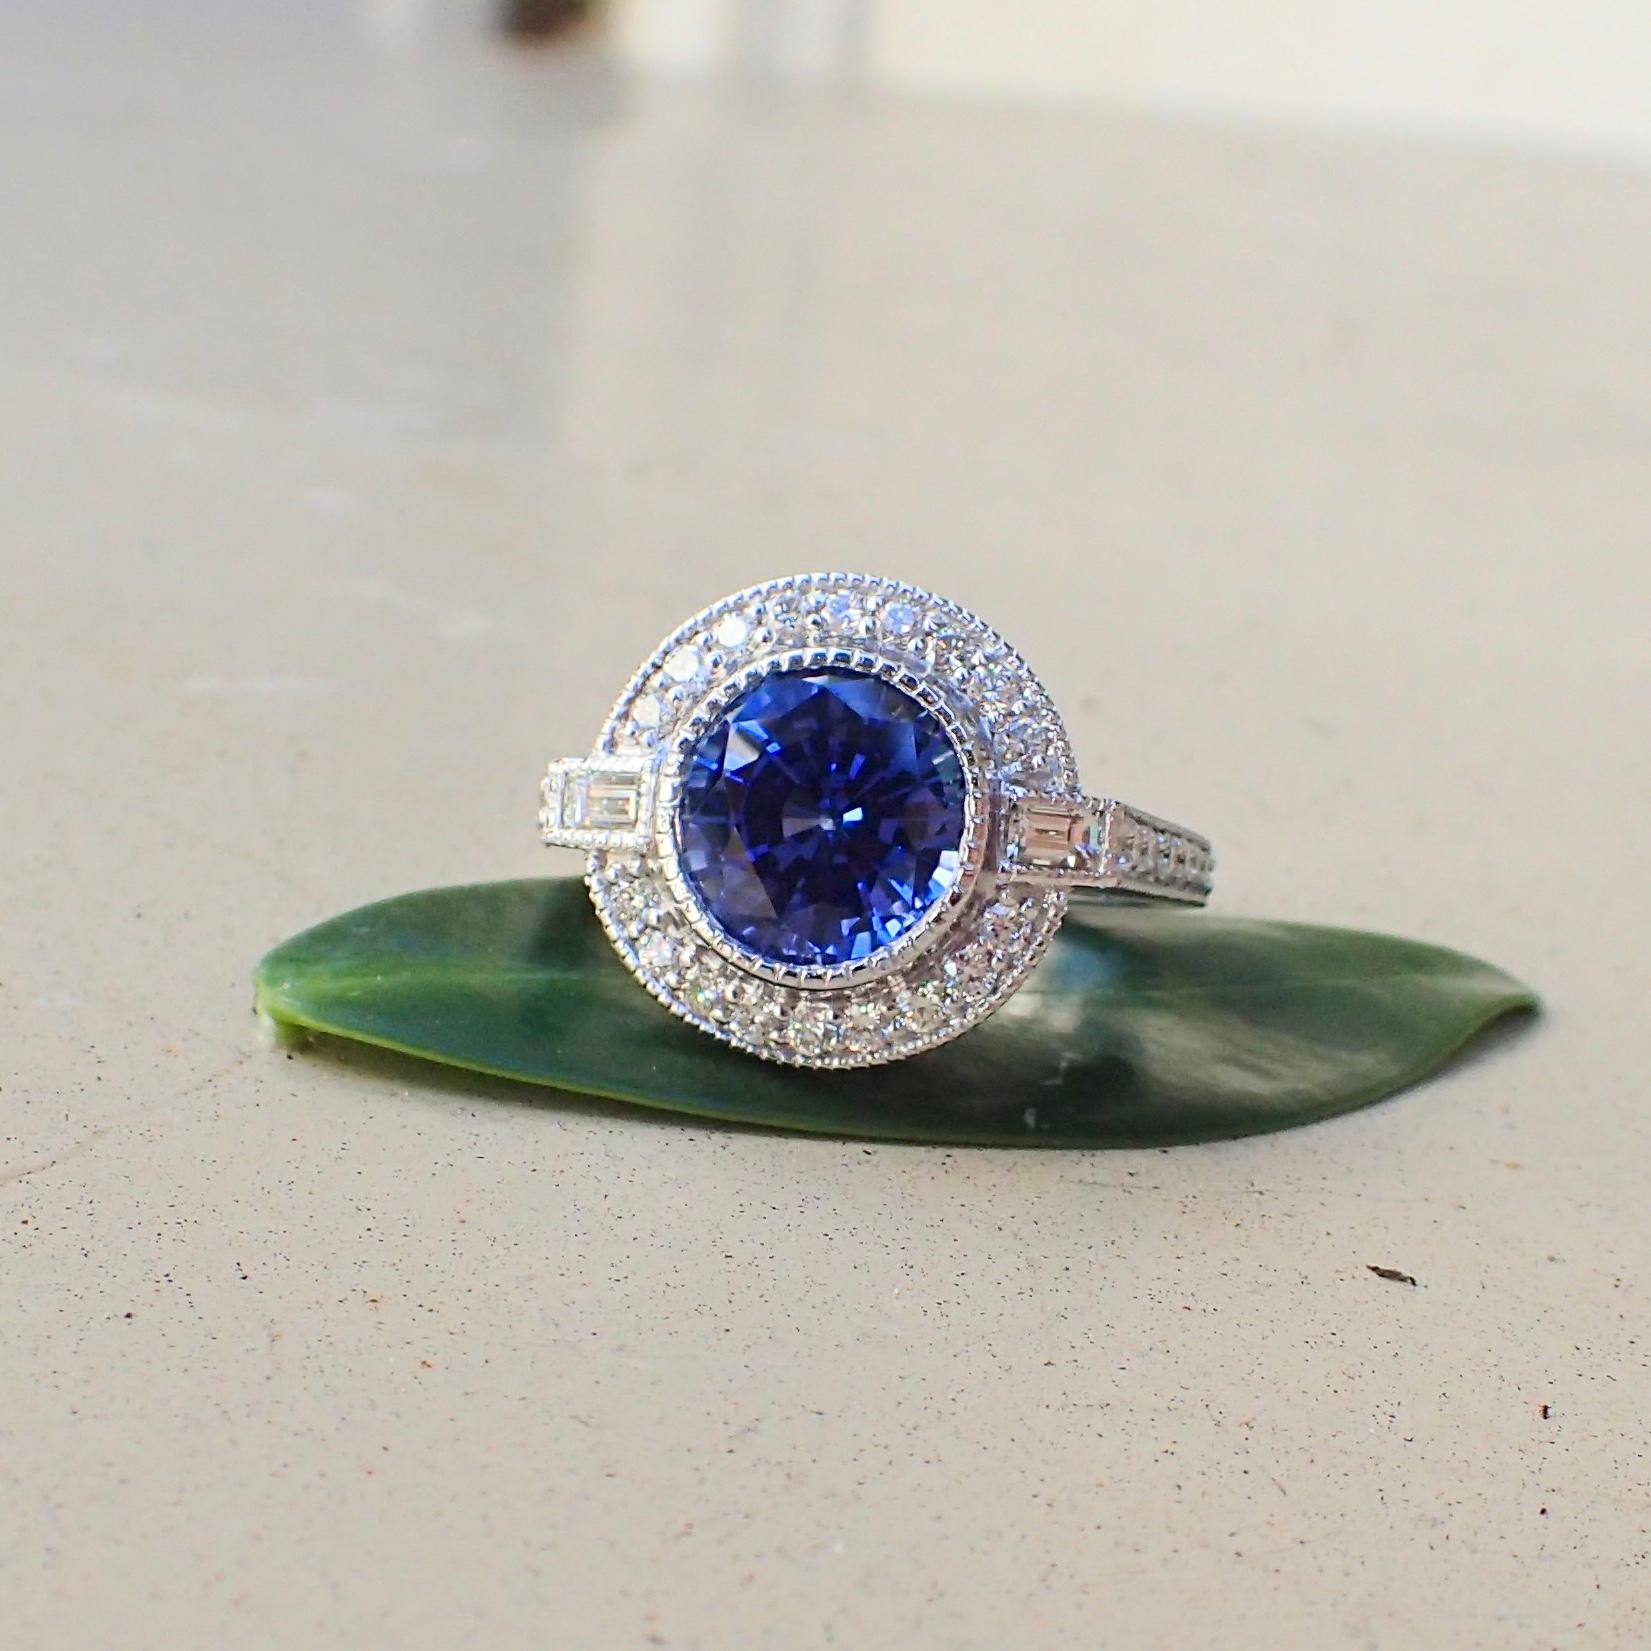 18k White Gold Ring with 3.93 carat Chatham Sapphire and 0.61 carats of Diamond In New Condition For Sale In Coral Gables, FL